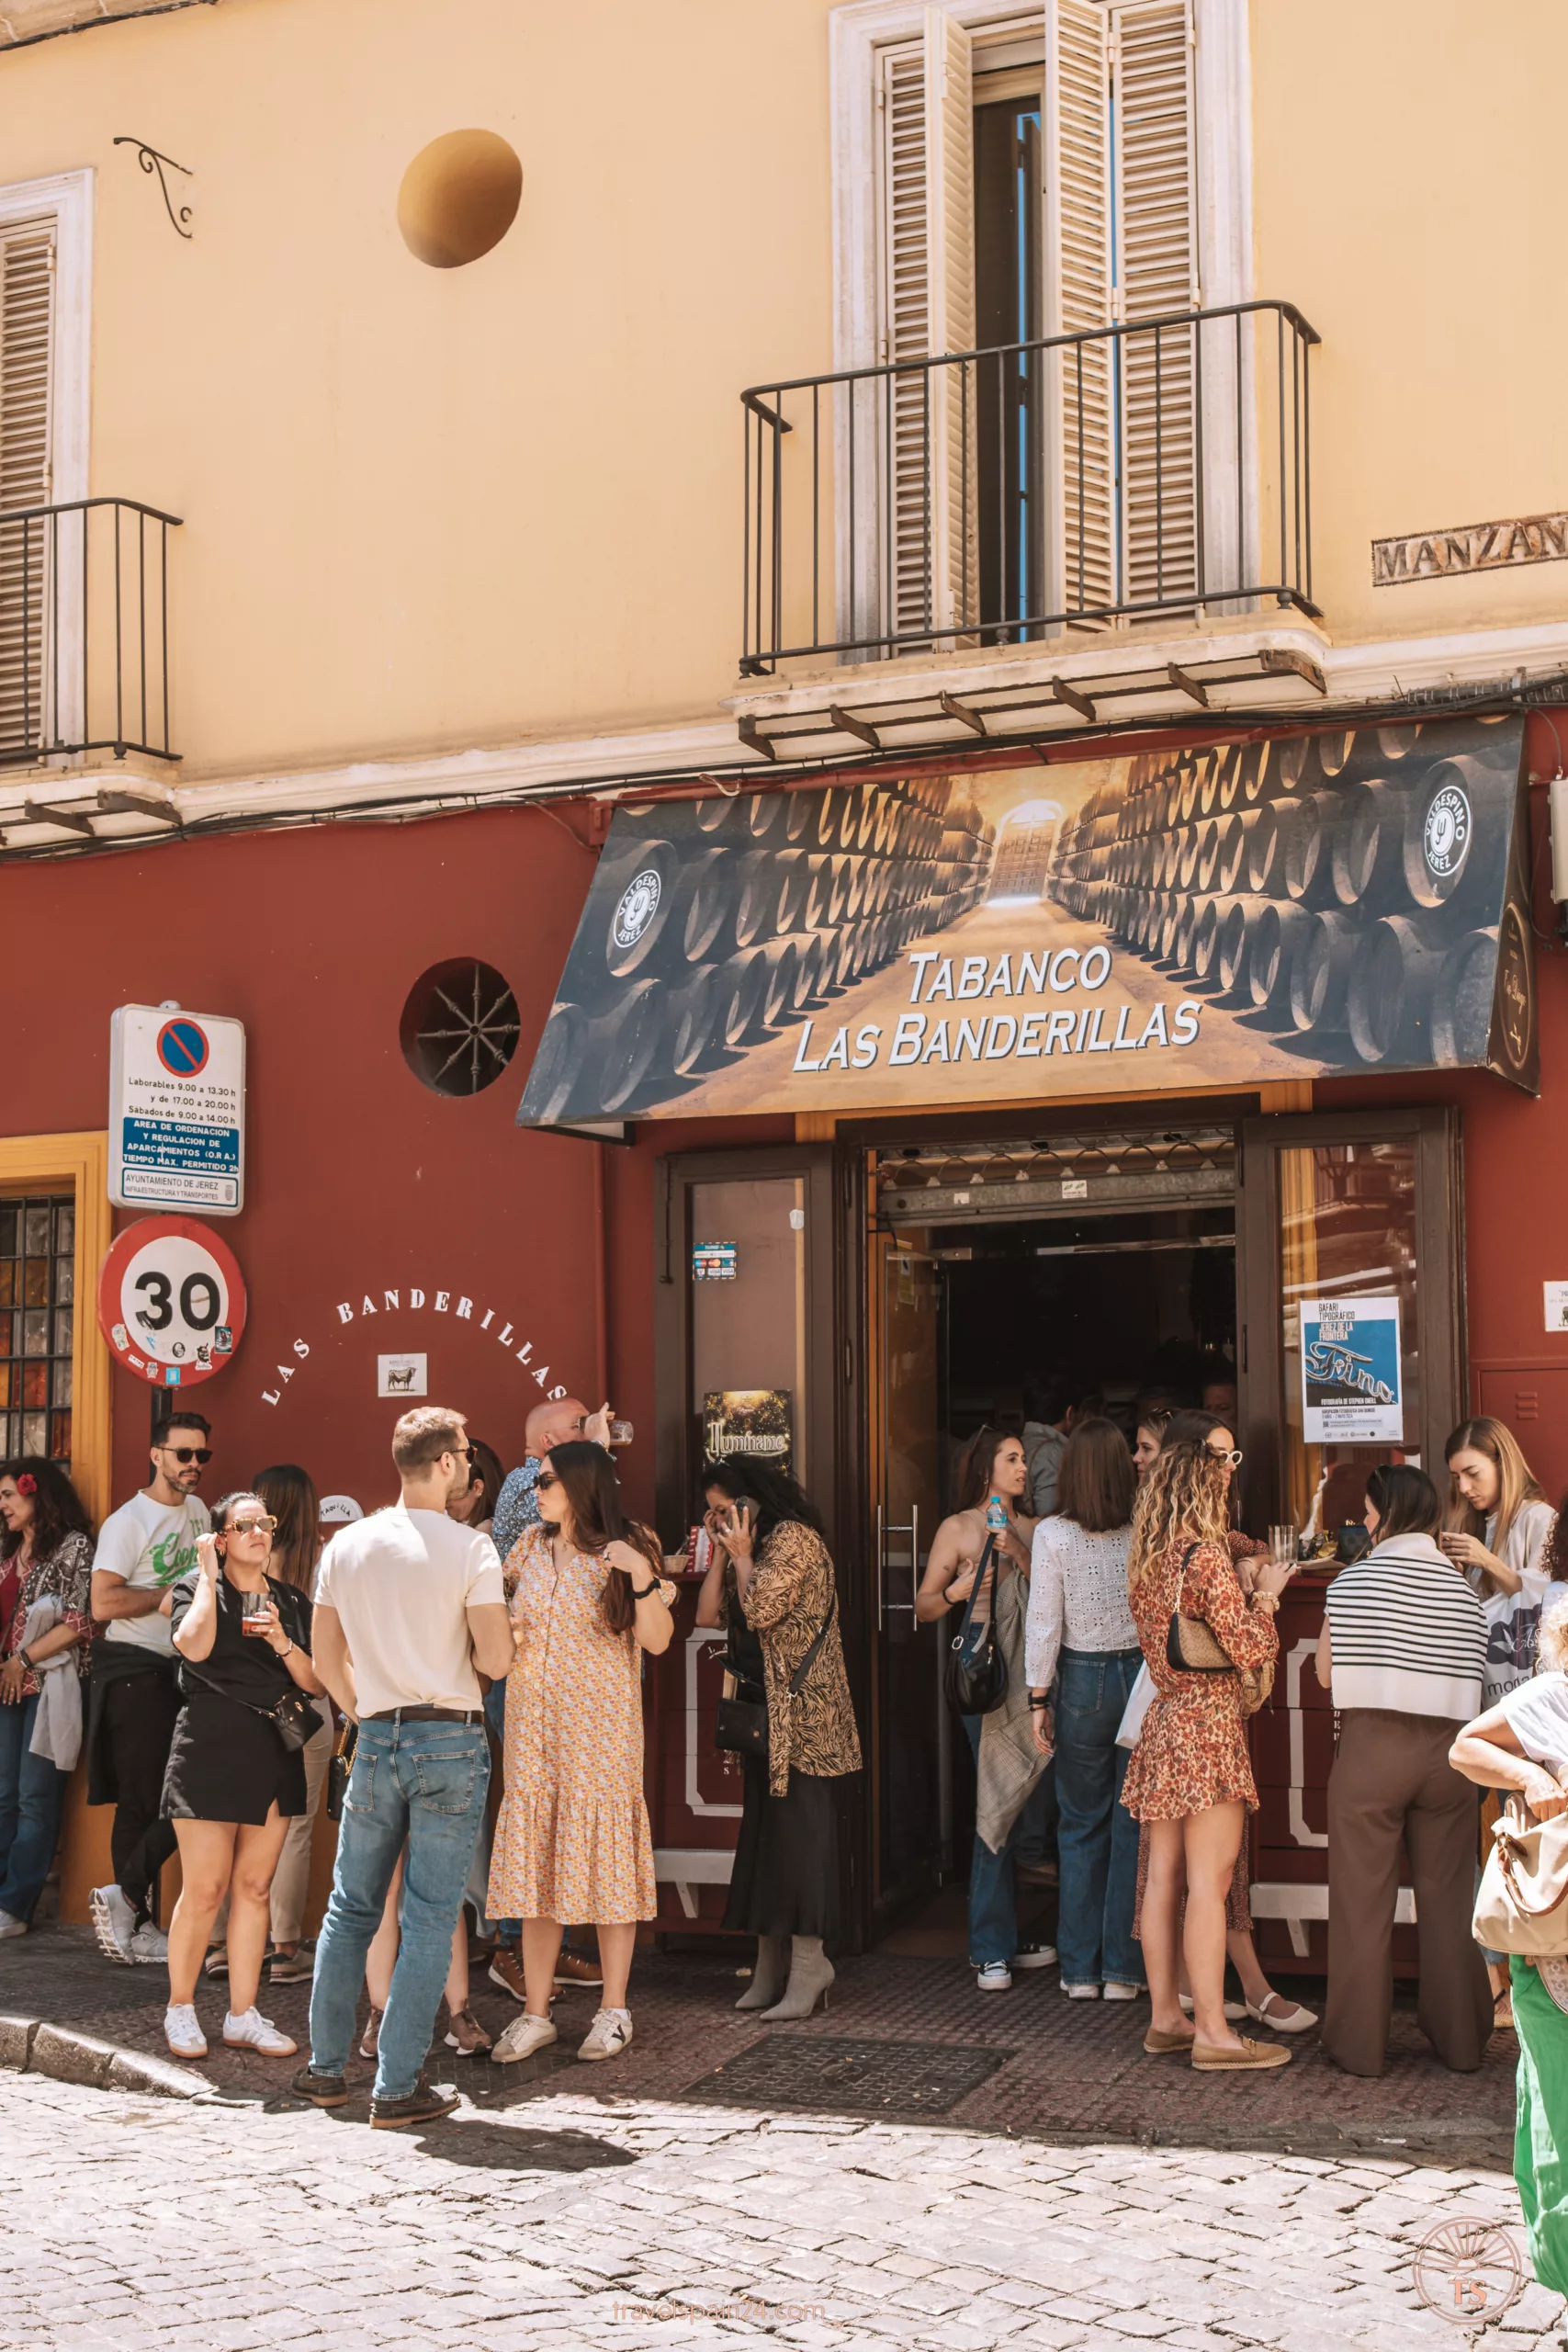 Entrance to Las Banderillas in Jerez de la Frontera, with patrons enjoying food and drinks outdoors. This image relates to the post by featuring a well-loved restaurant in Jerez de la Frontera.